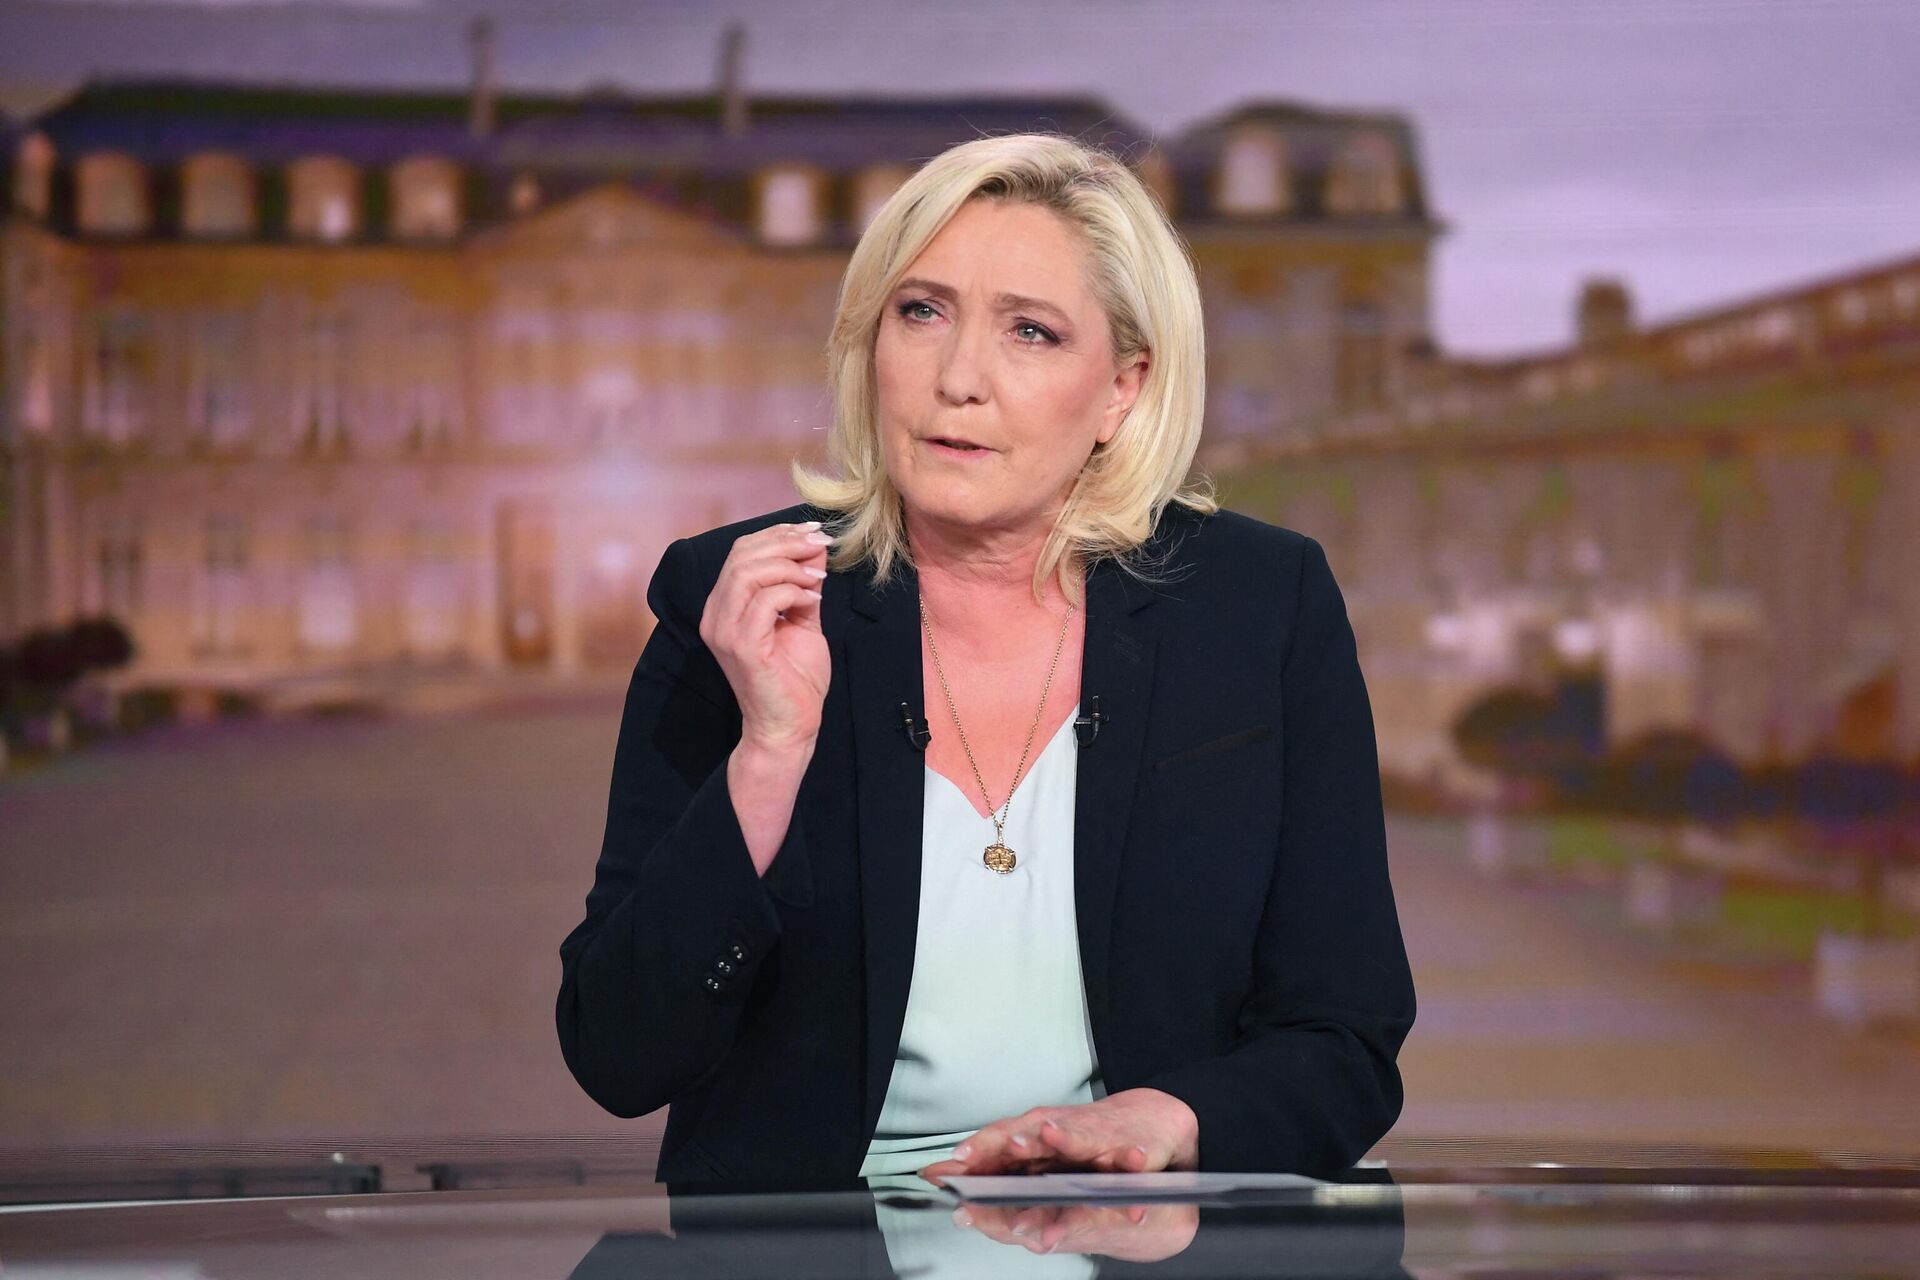 Marine Le Pen takes part in the evening news broadcast of French TV channel TF1, in Boulogne-Billancourt, outside Paris, on April 12, 2022 - Sputnik International, 1920, 19.04.2022